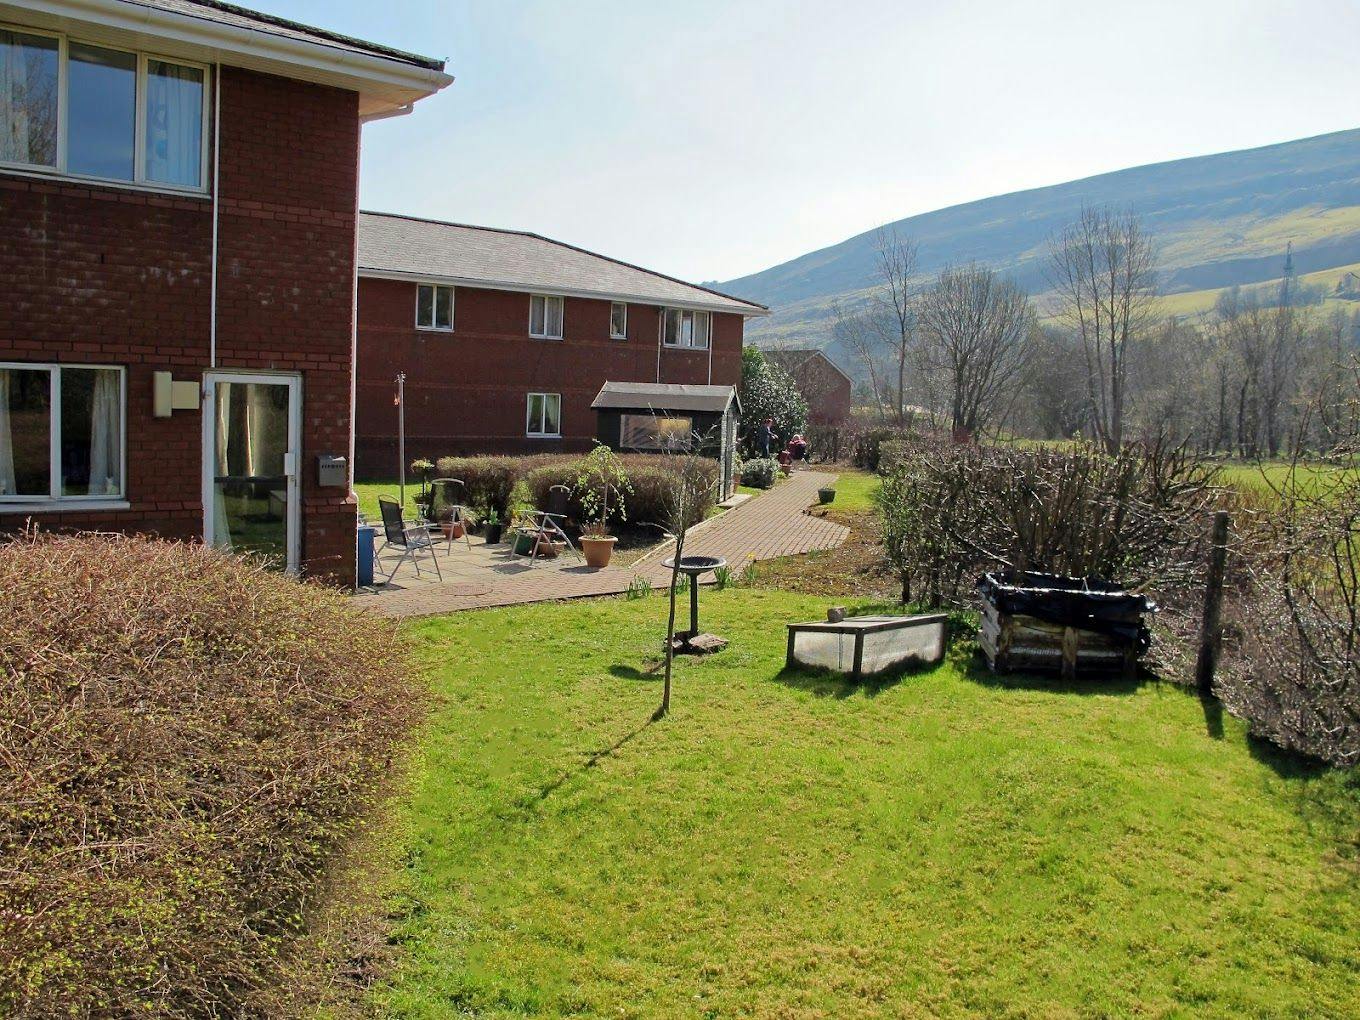 Cwm Celyn Care Home